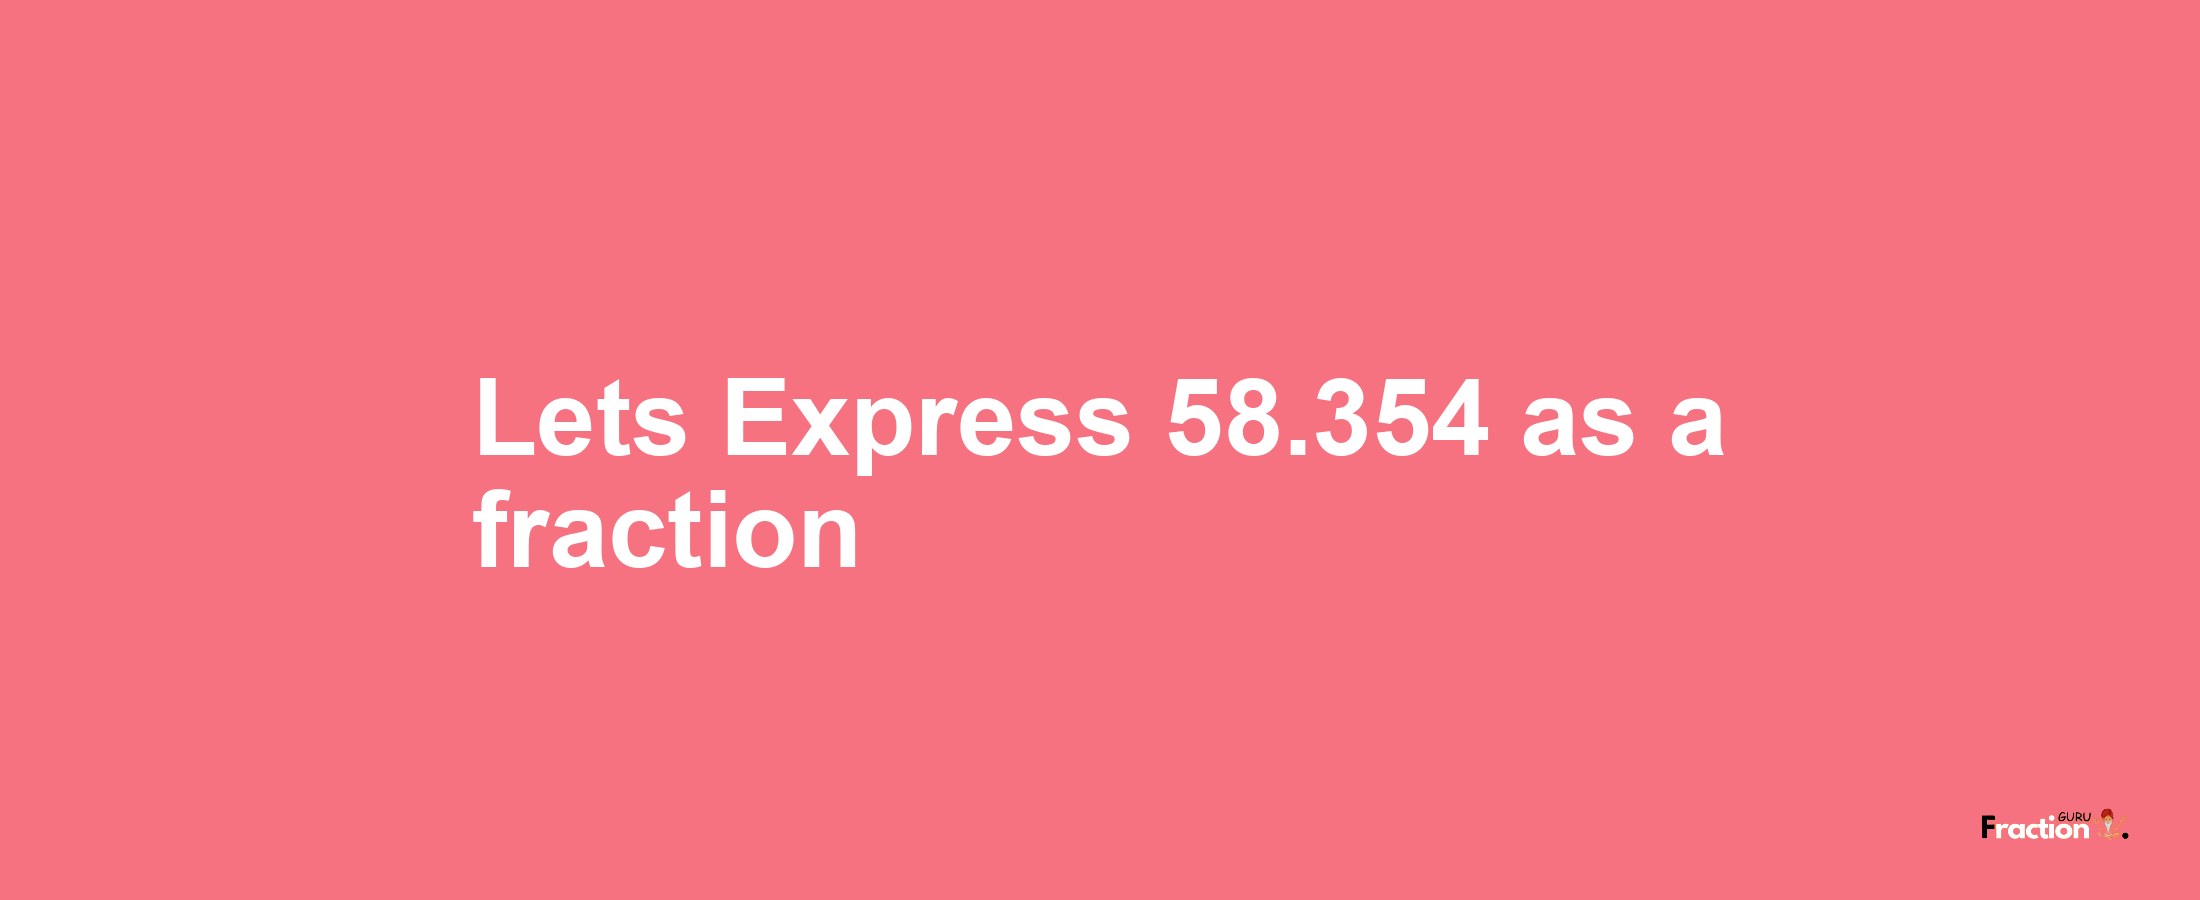 Lets Express 58.354 as afraction